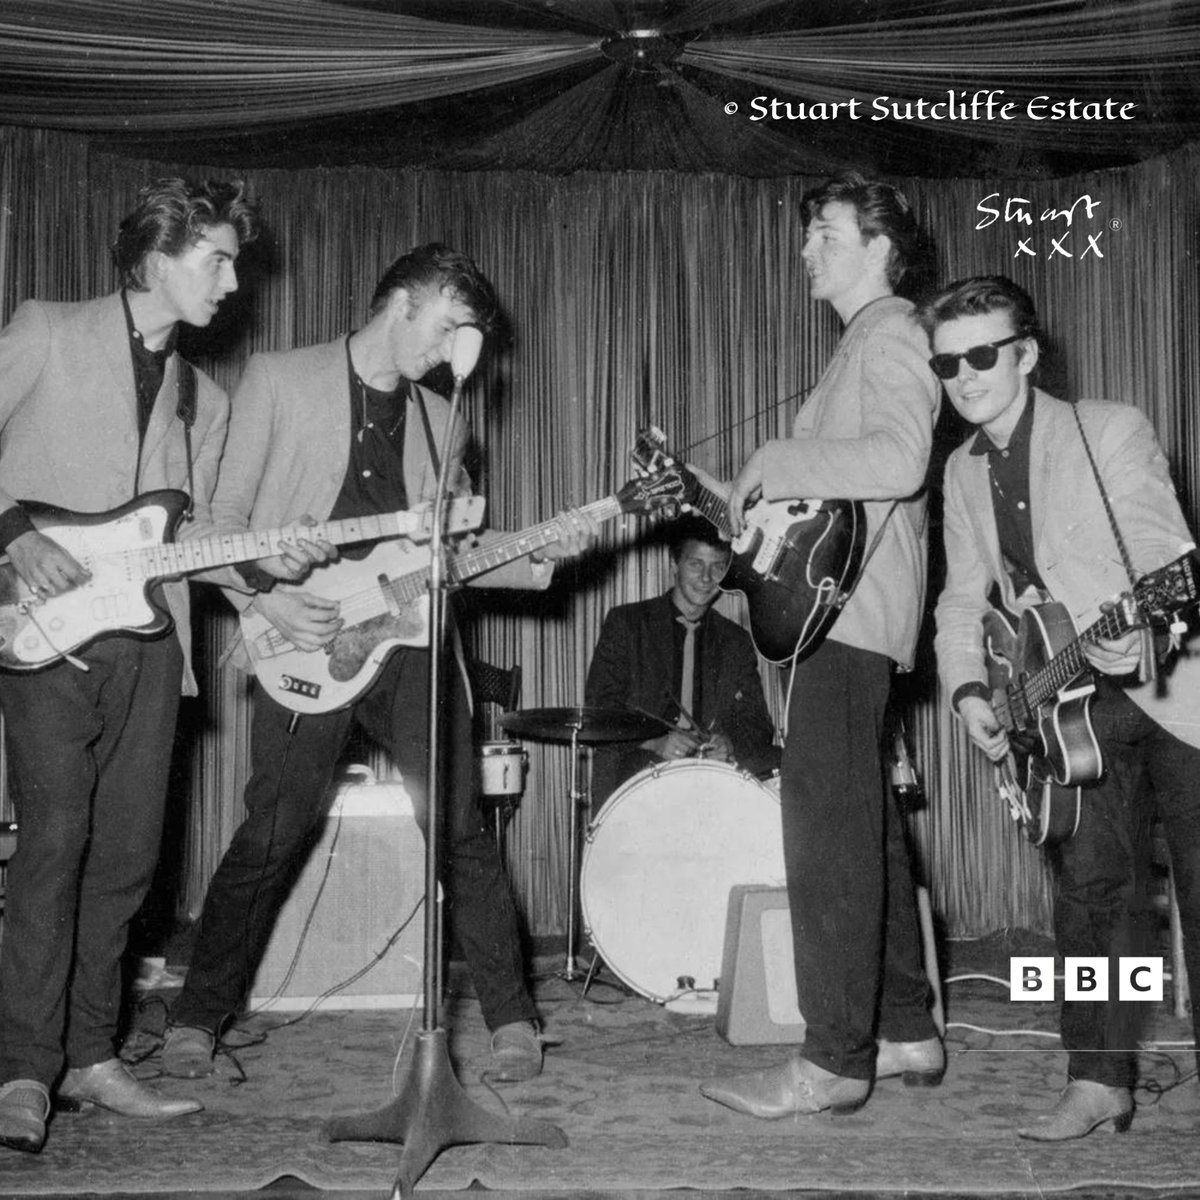 On stage but elsewhere in my thoughts… I’d rather be painting…

#Beatles #Art #PeteBest  #CasbahClub #BackBeat #Liverpool #Hamburg
Give a listen to early #CavernClub days @BBC buff.ly/4aGCKPr  

Follow us @stuartsutcliffeeestate